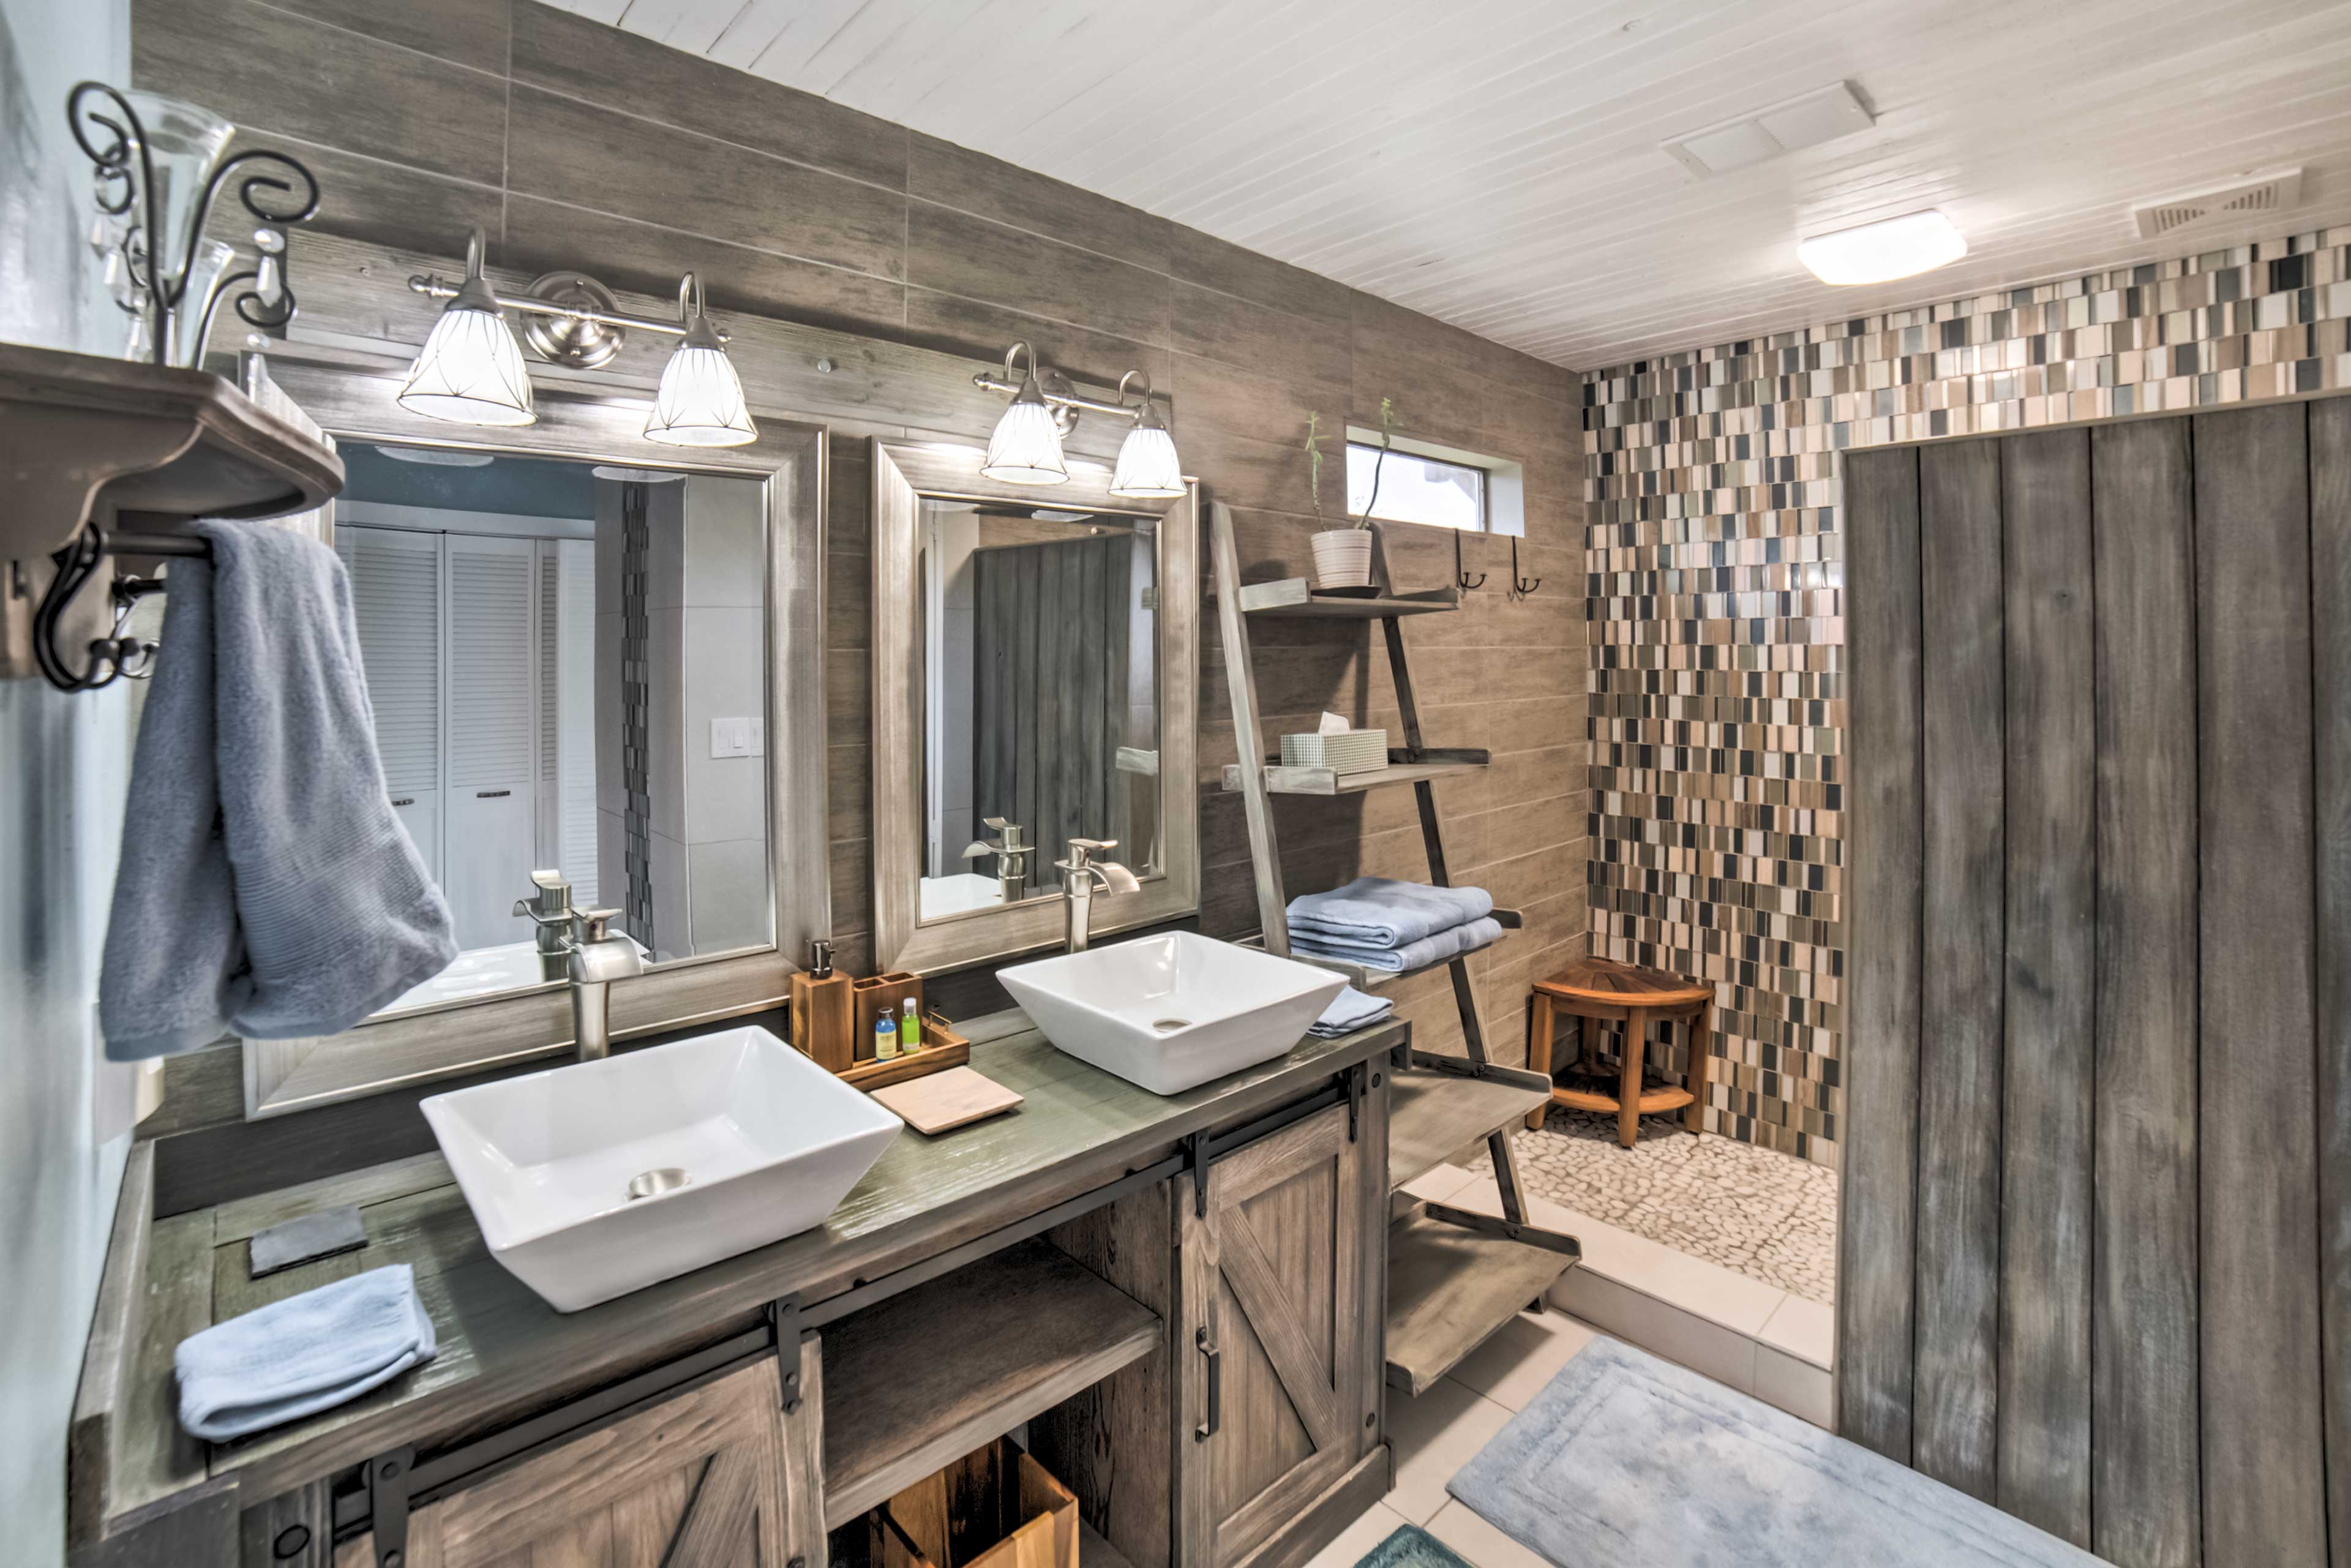 The en-suite bath features Jack-and-Jill sinks and a large walk-in shower.